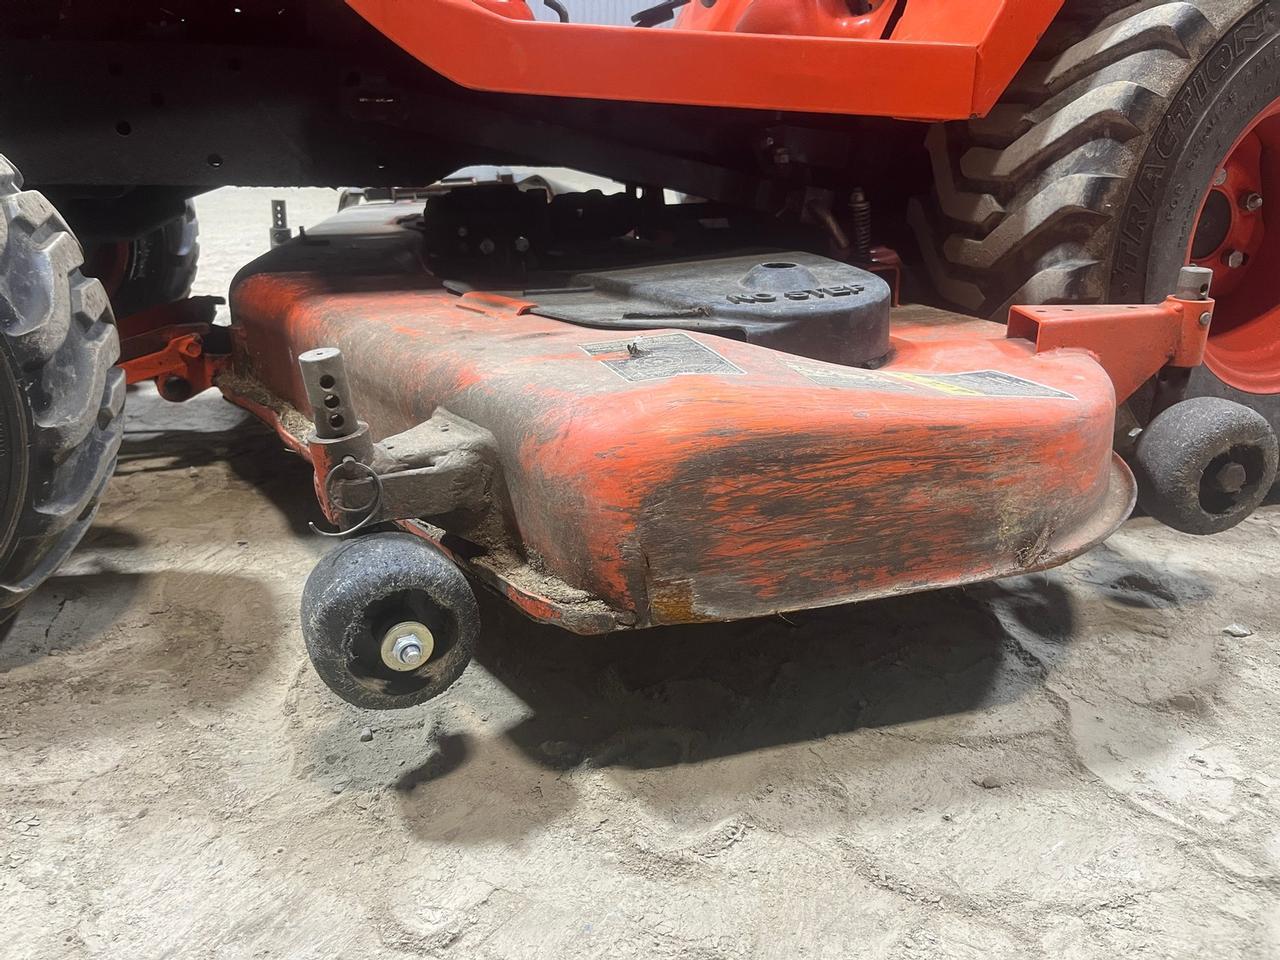 2013 Kubota BX2360 Tractor with Belly Mower